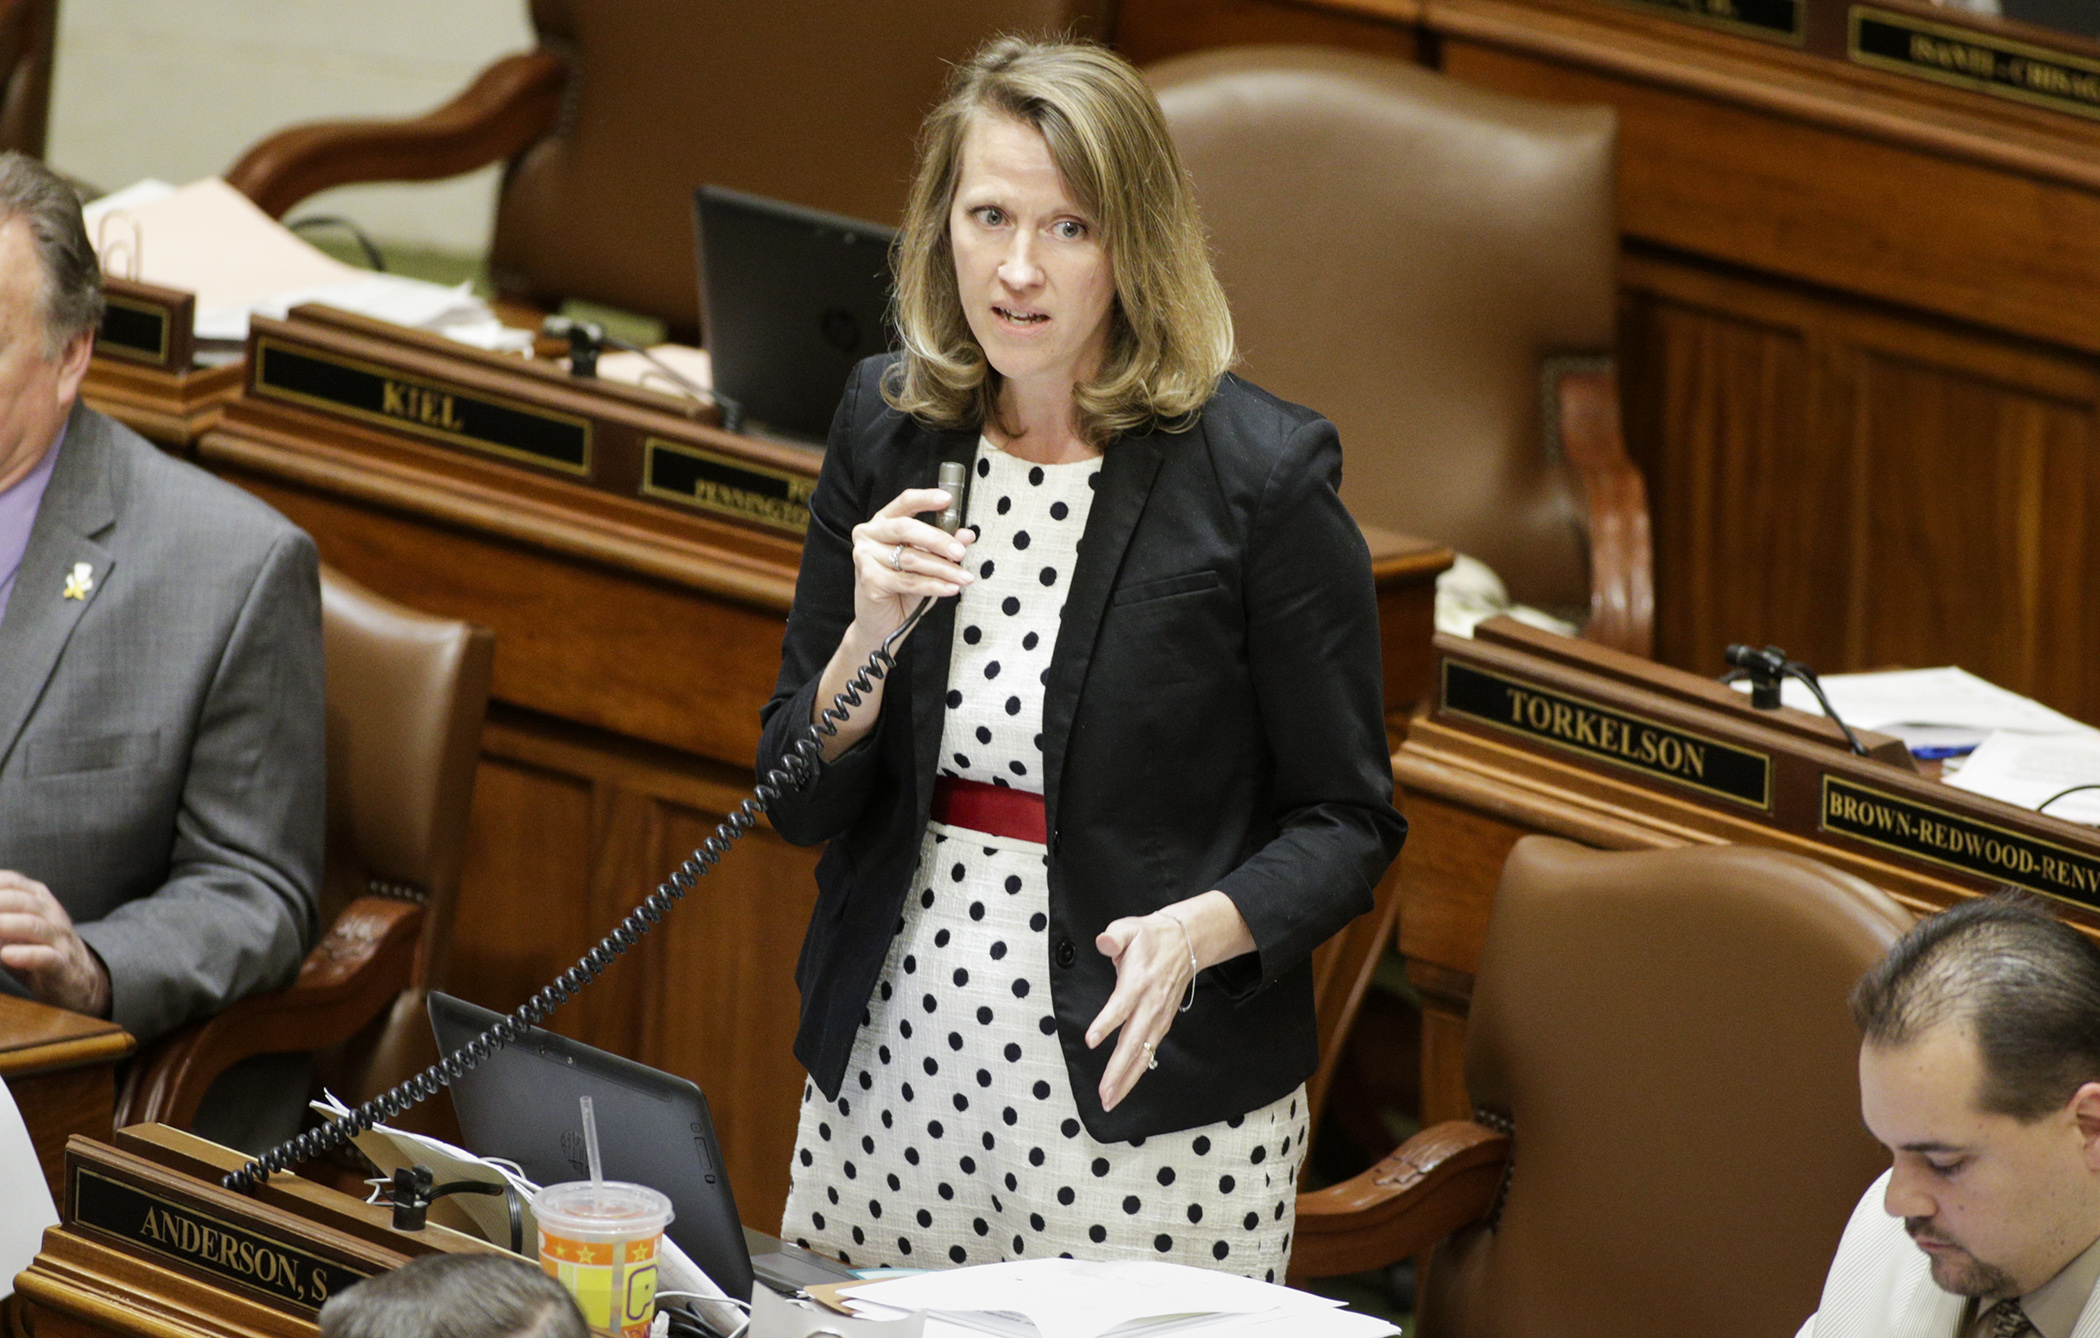 Rep. Sarah Anderson, chair of the House State Government Finance Committee, describes provisions of the omnibus state government finance bill during House Floor debate April 6. Photo by Paul Battaglia